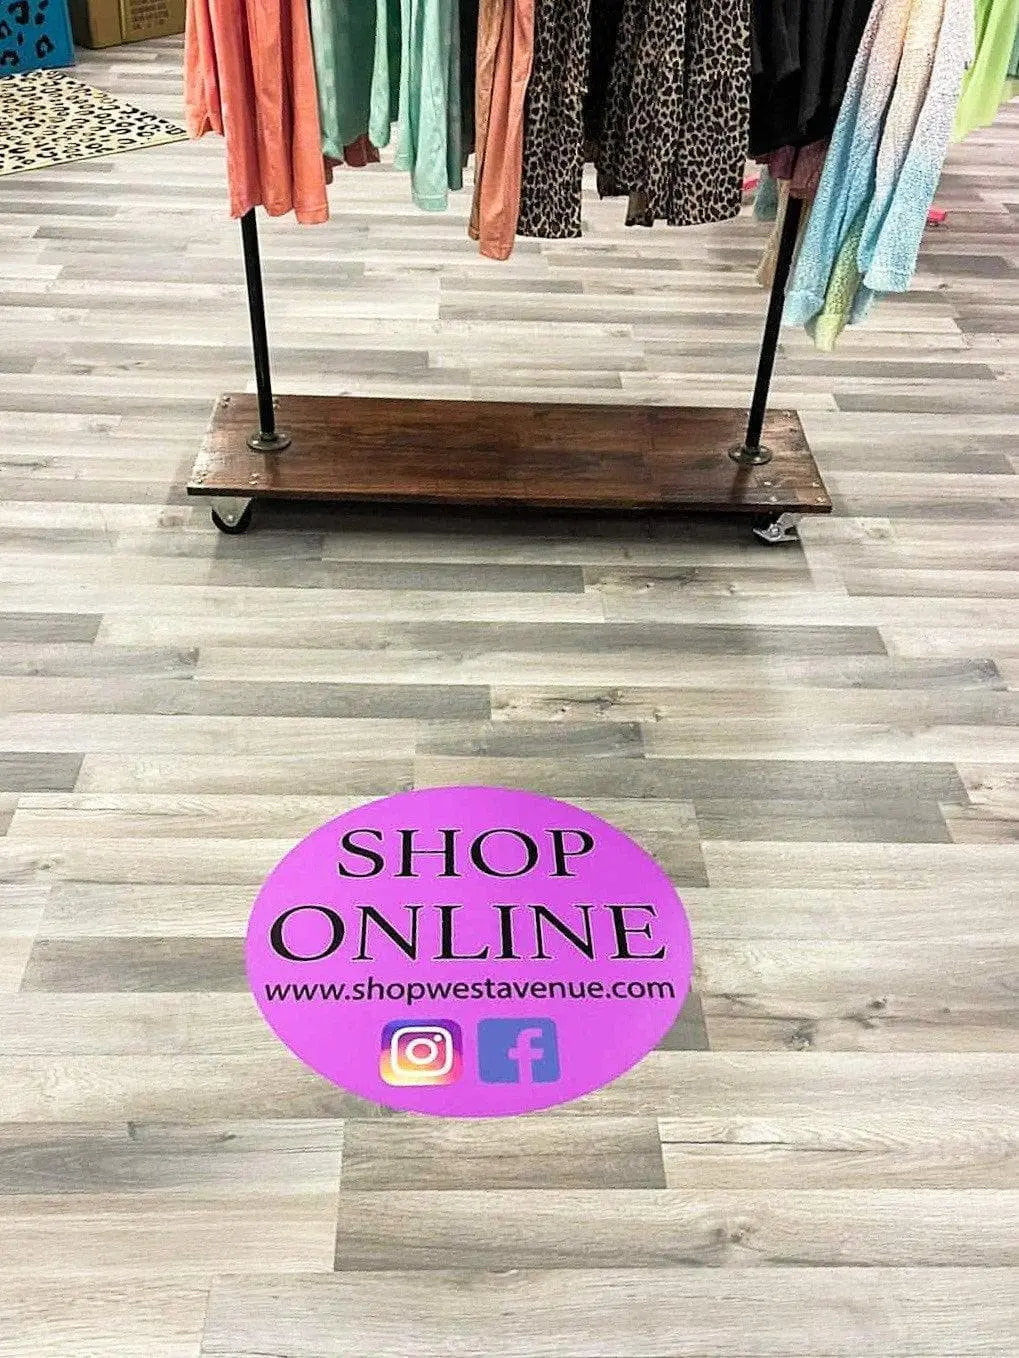 Custom floor decal in boutique shop pink with social media and website Facebook Instagram with clothing rack sales floor